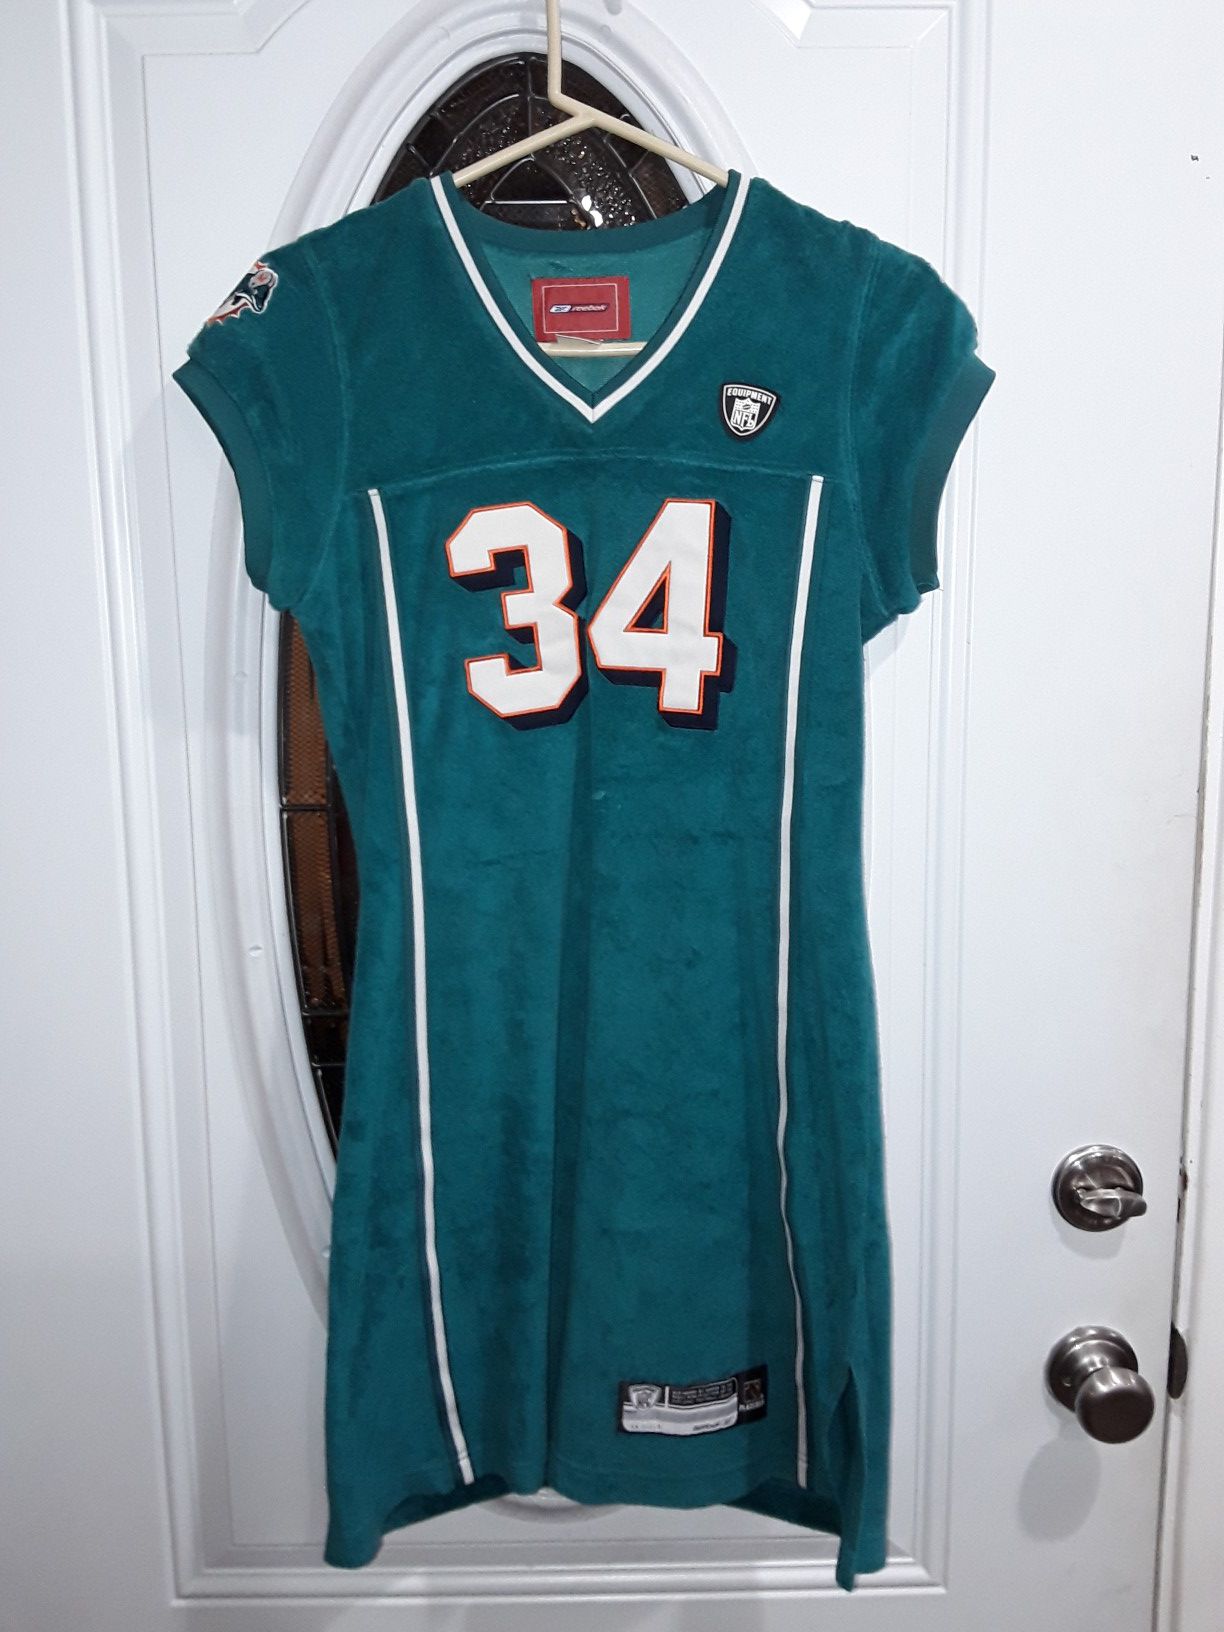 Womens Miami dolphins number 34 dress size large